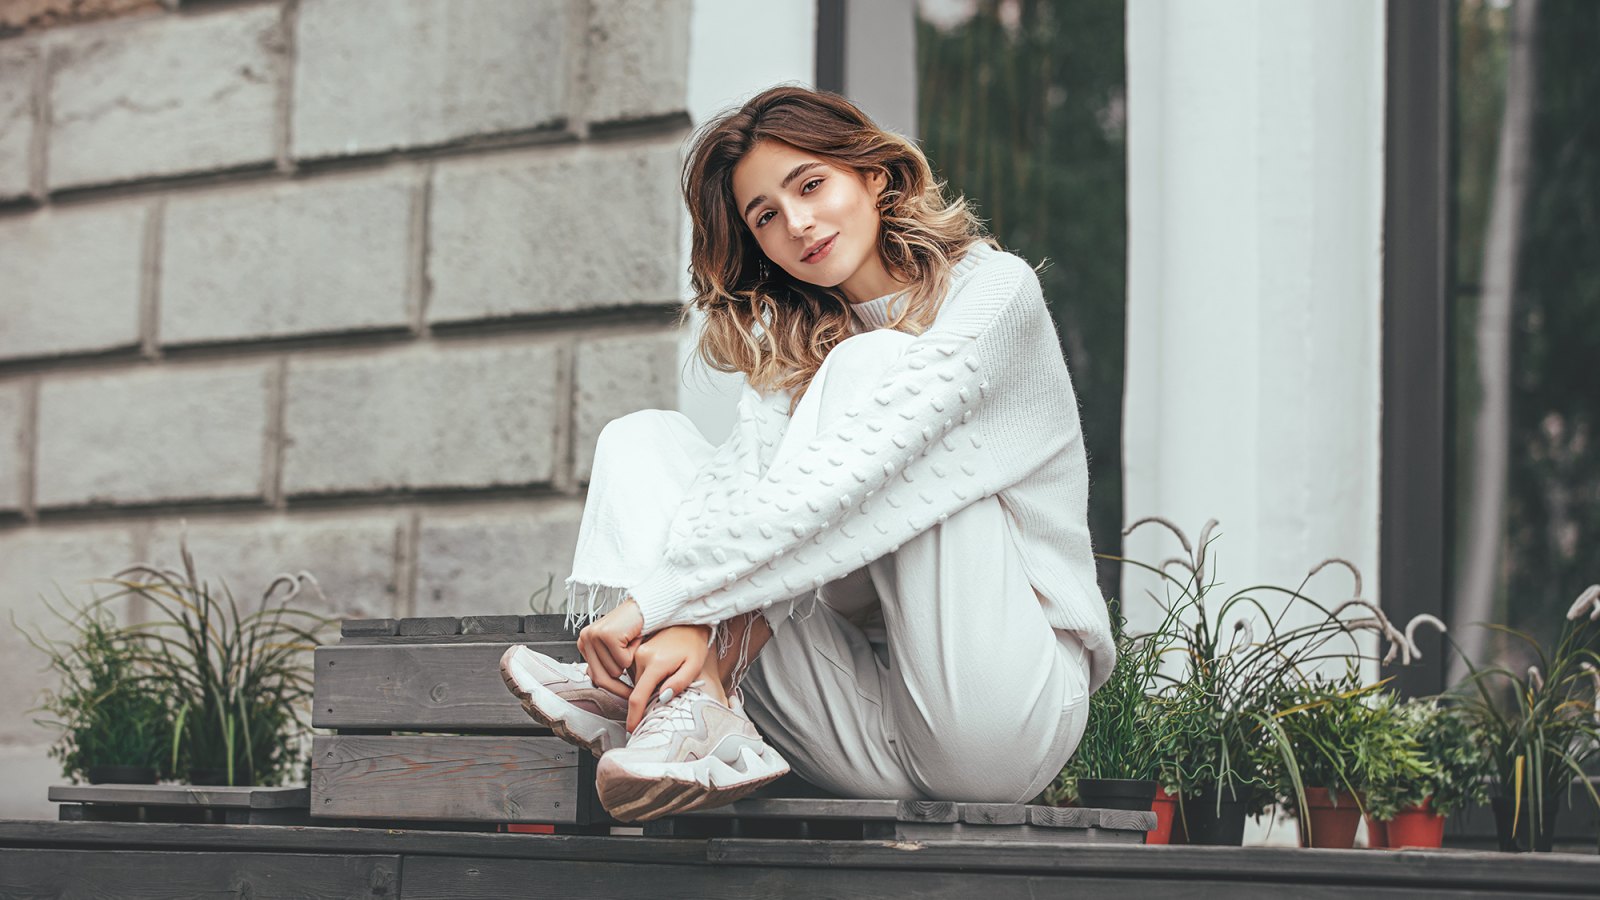 17 Knit Loungewear Sets You Need to Add to Your  Cart